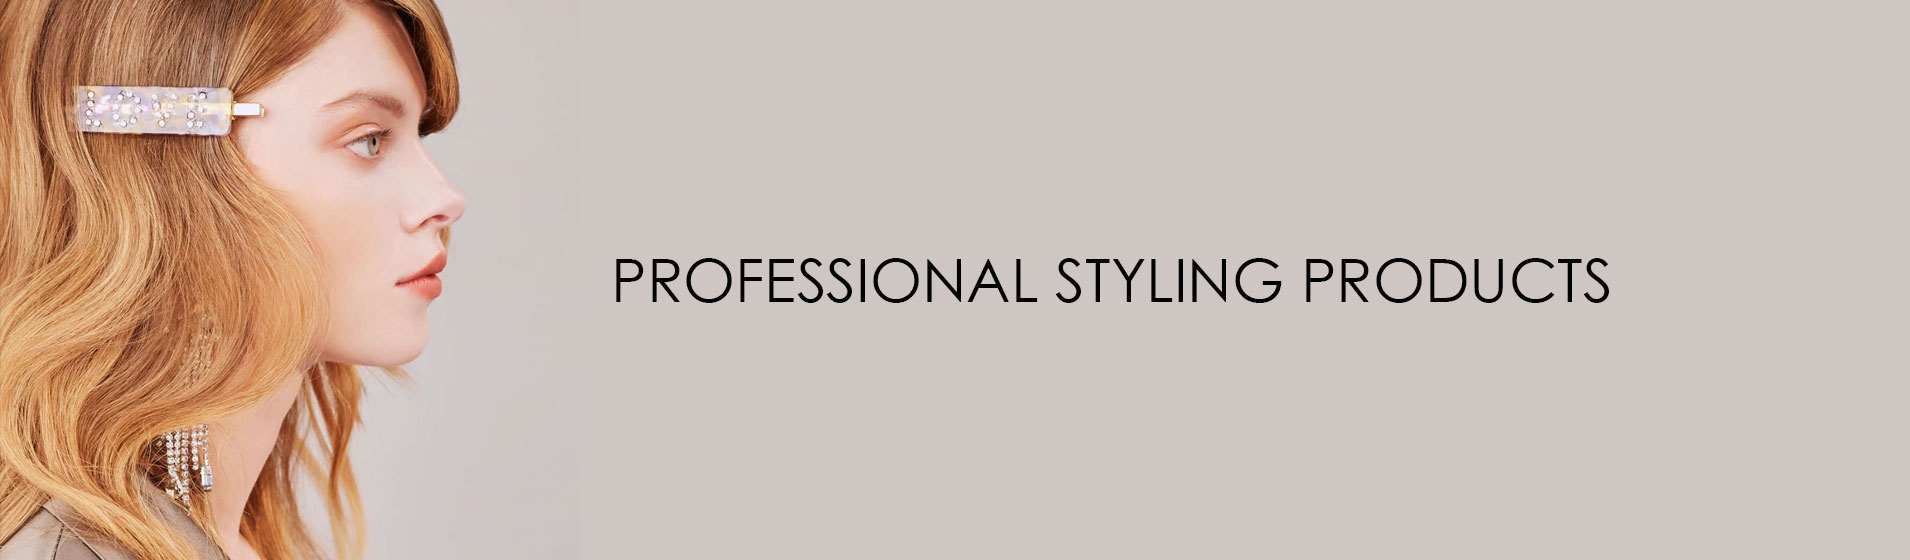 PROFESSIONAL STYLING PRODUCTS at elements hair salon in Oxted, Surrey